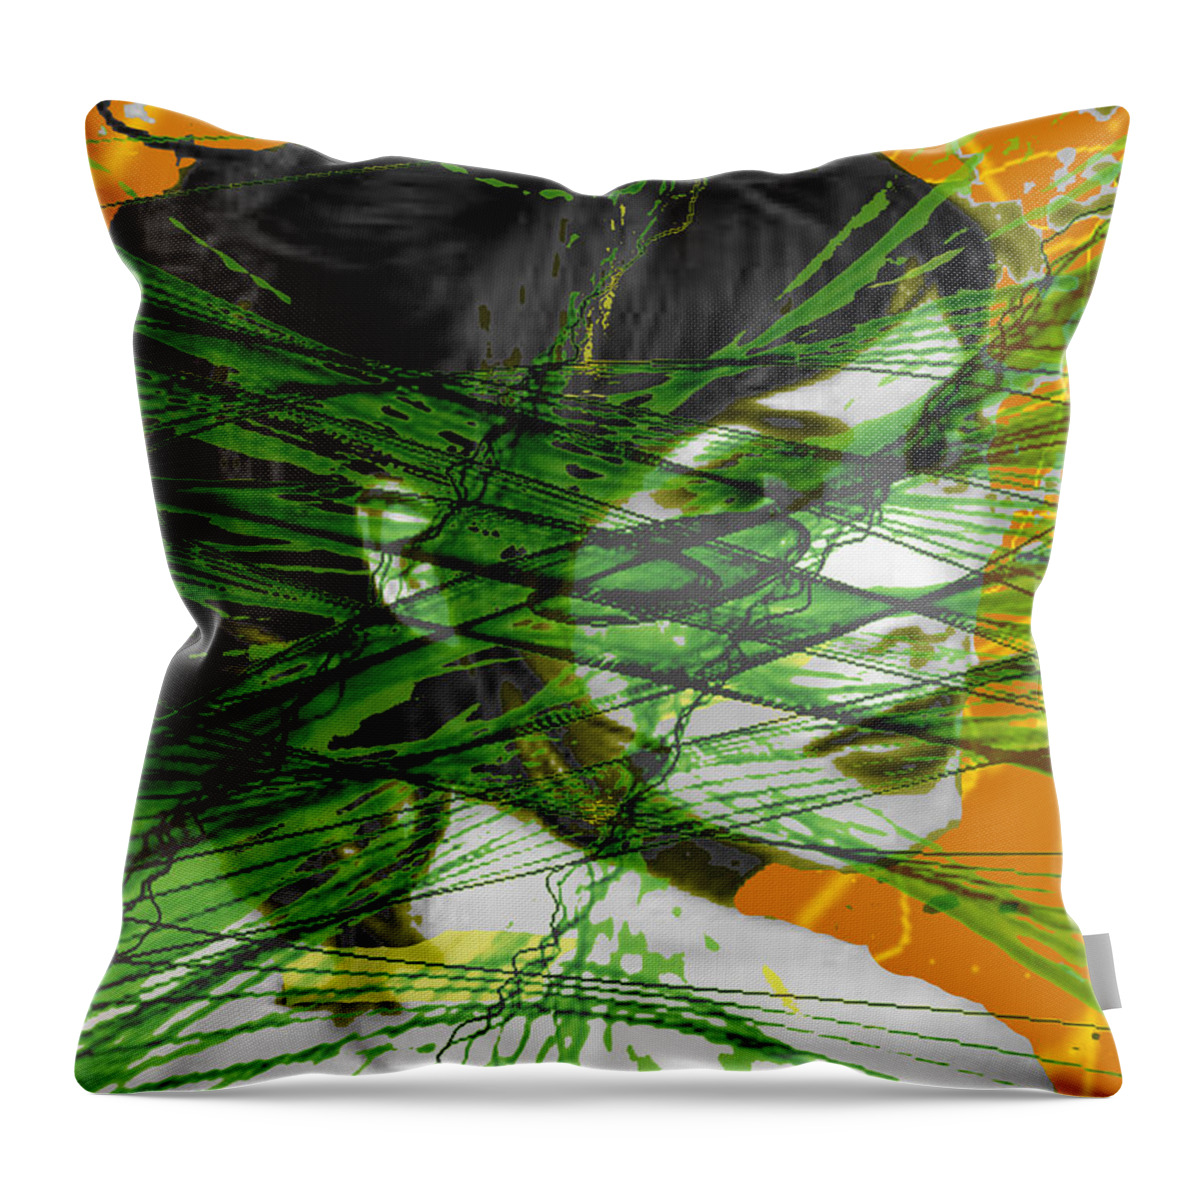 A Tangled Web Throw Pillow featuring the digital art A Tangled Web by Seth Weaver